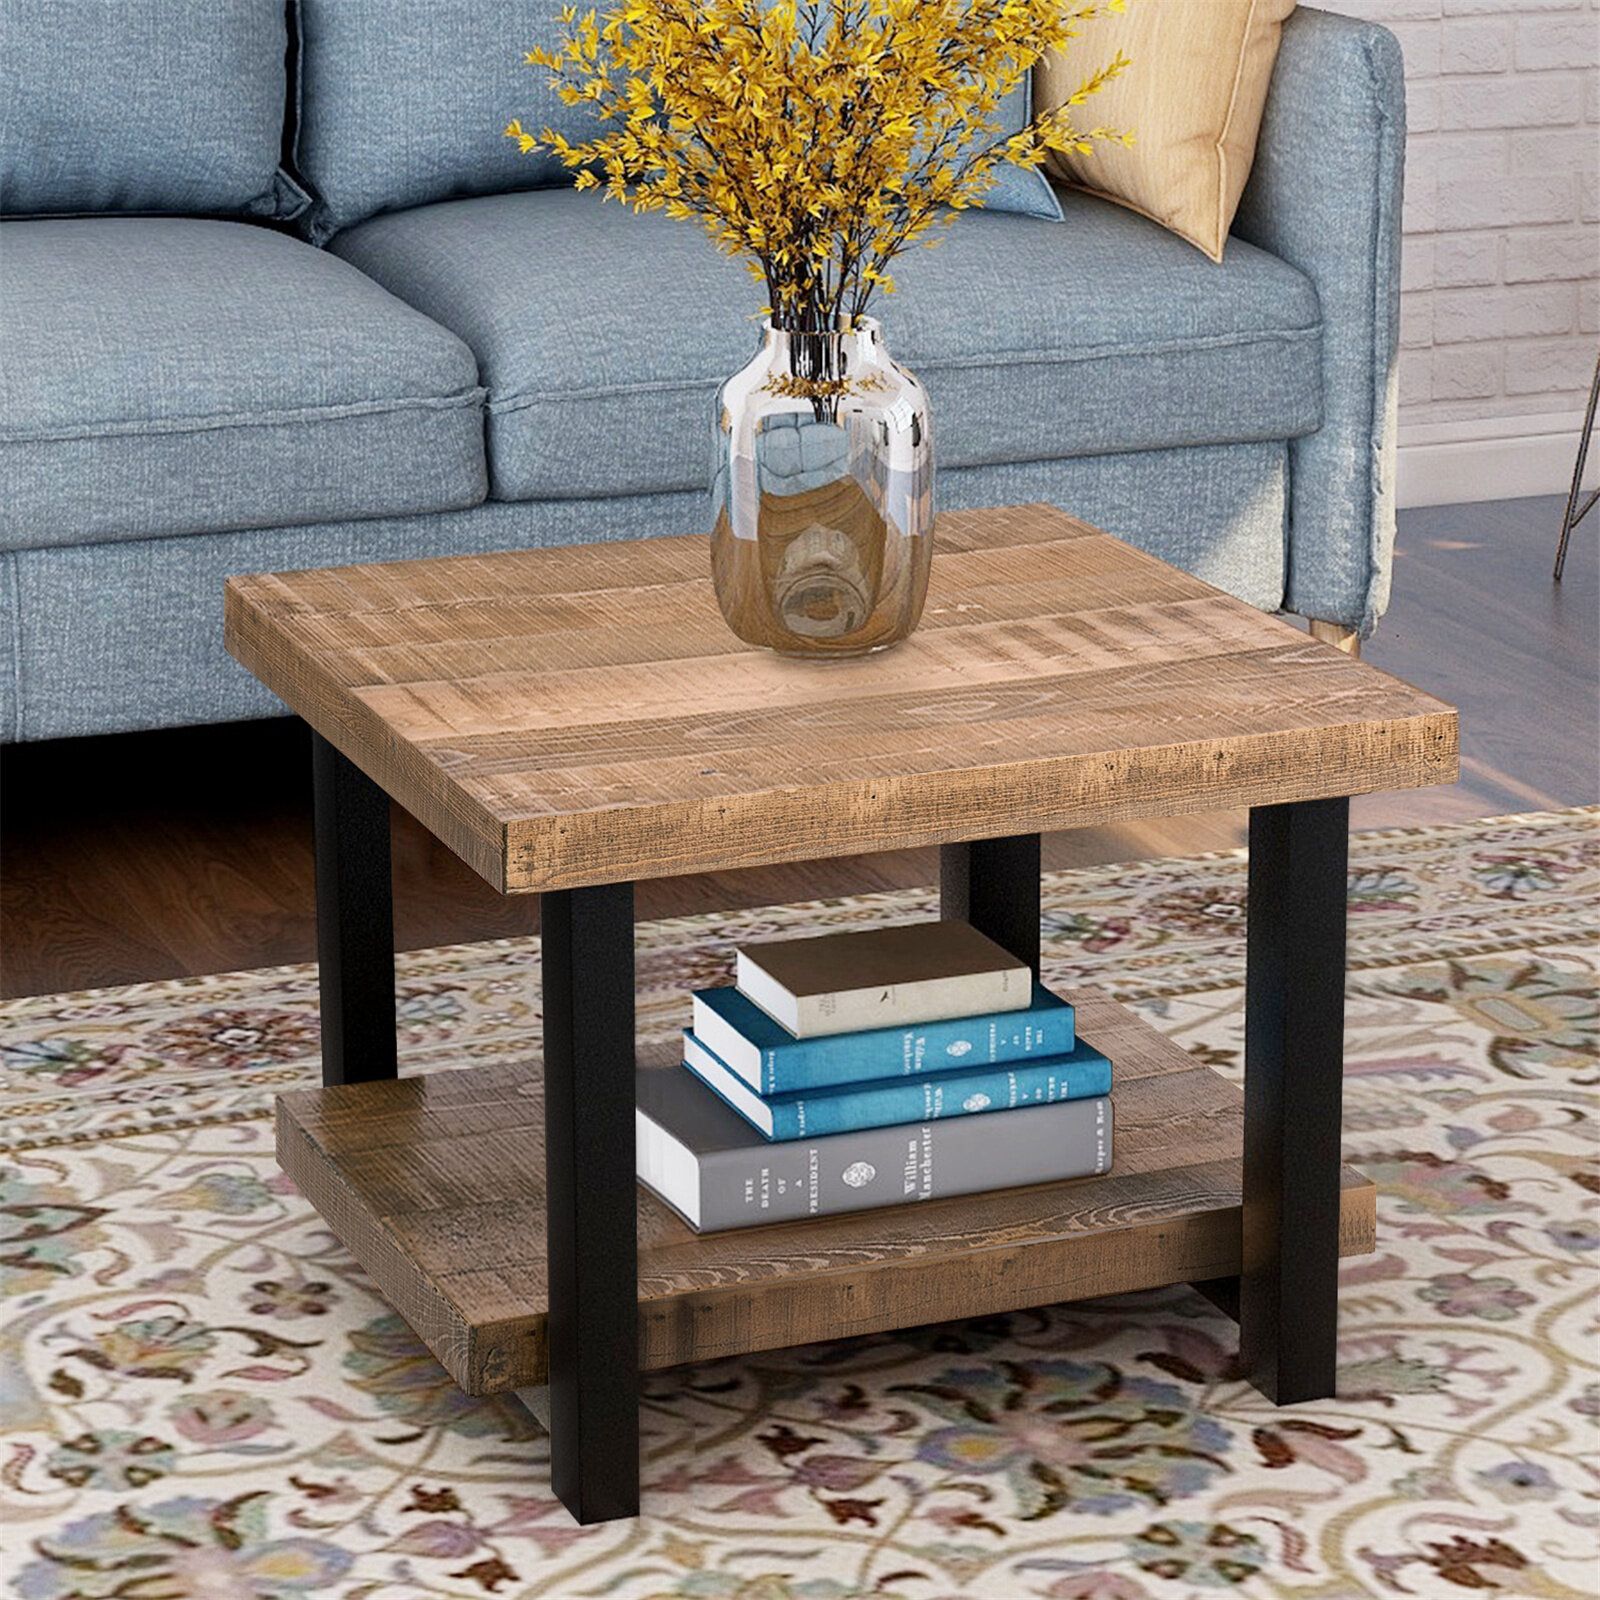 Millwood Pines Rustic Natural Coffee Table With Storage Shelf For Living  Room | Wayfair With Regard To Rustic Natural Coffee Tables (View 9 of 15)